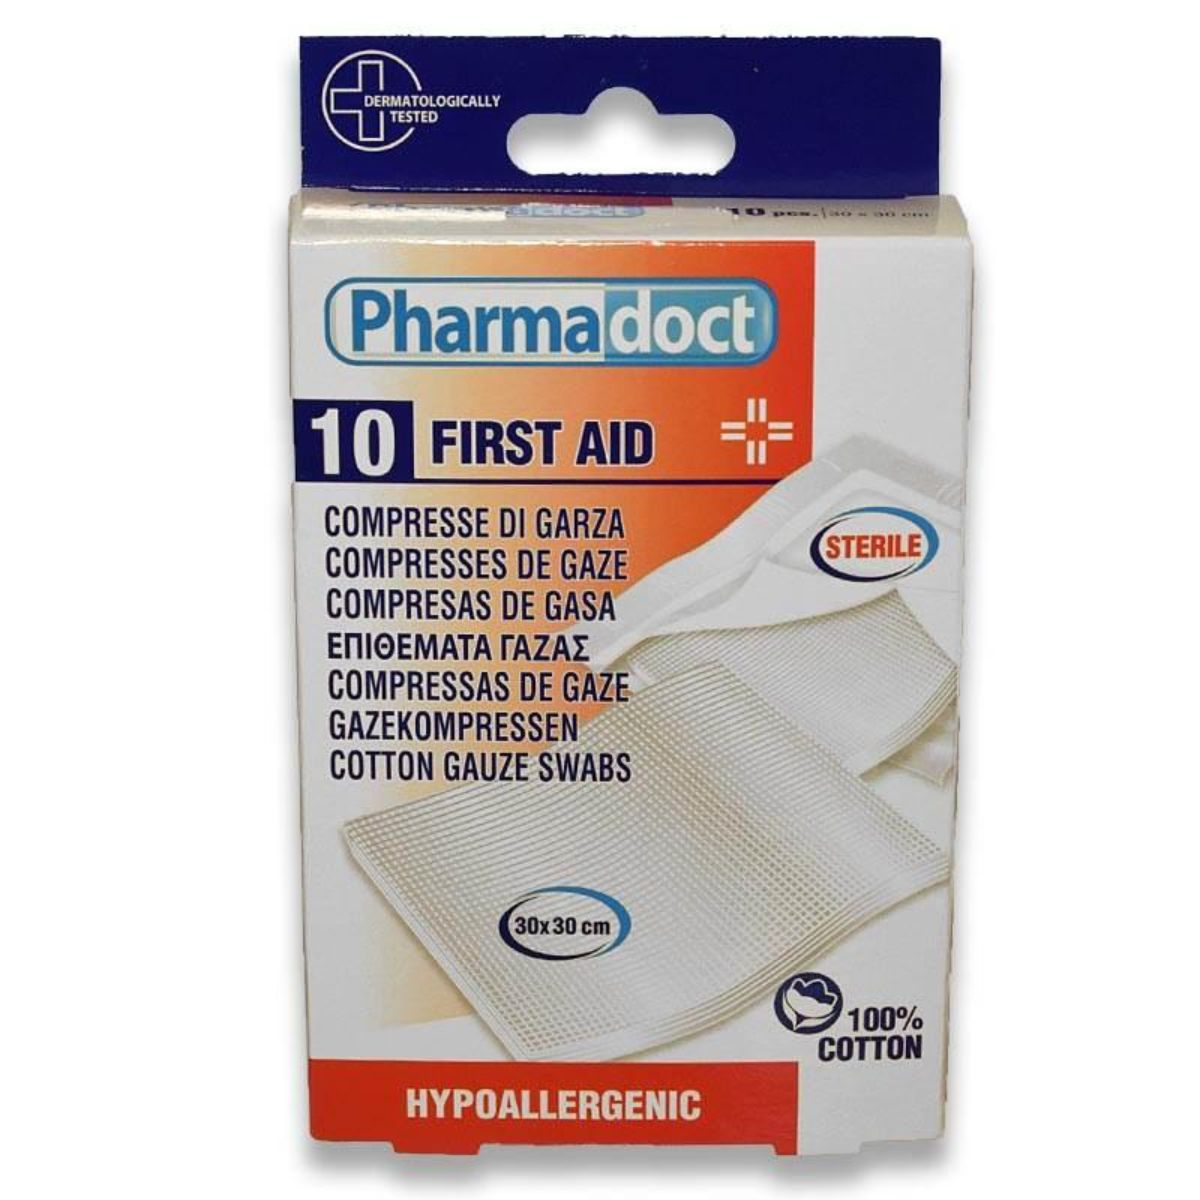 Comprese sterile din bumbac, Pharmadoct First Aid, 10 Buc 30 x 30 cm absorbante imagine 2022 protejamcopilaria.ro